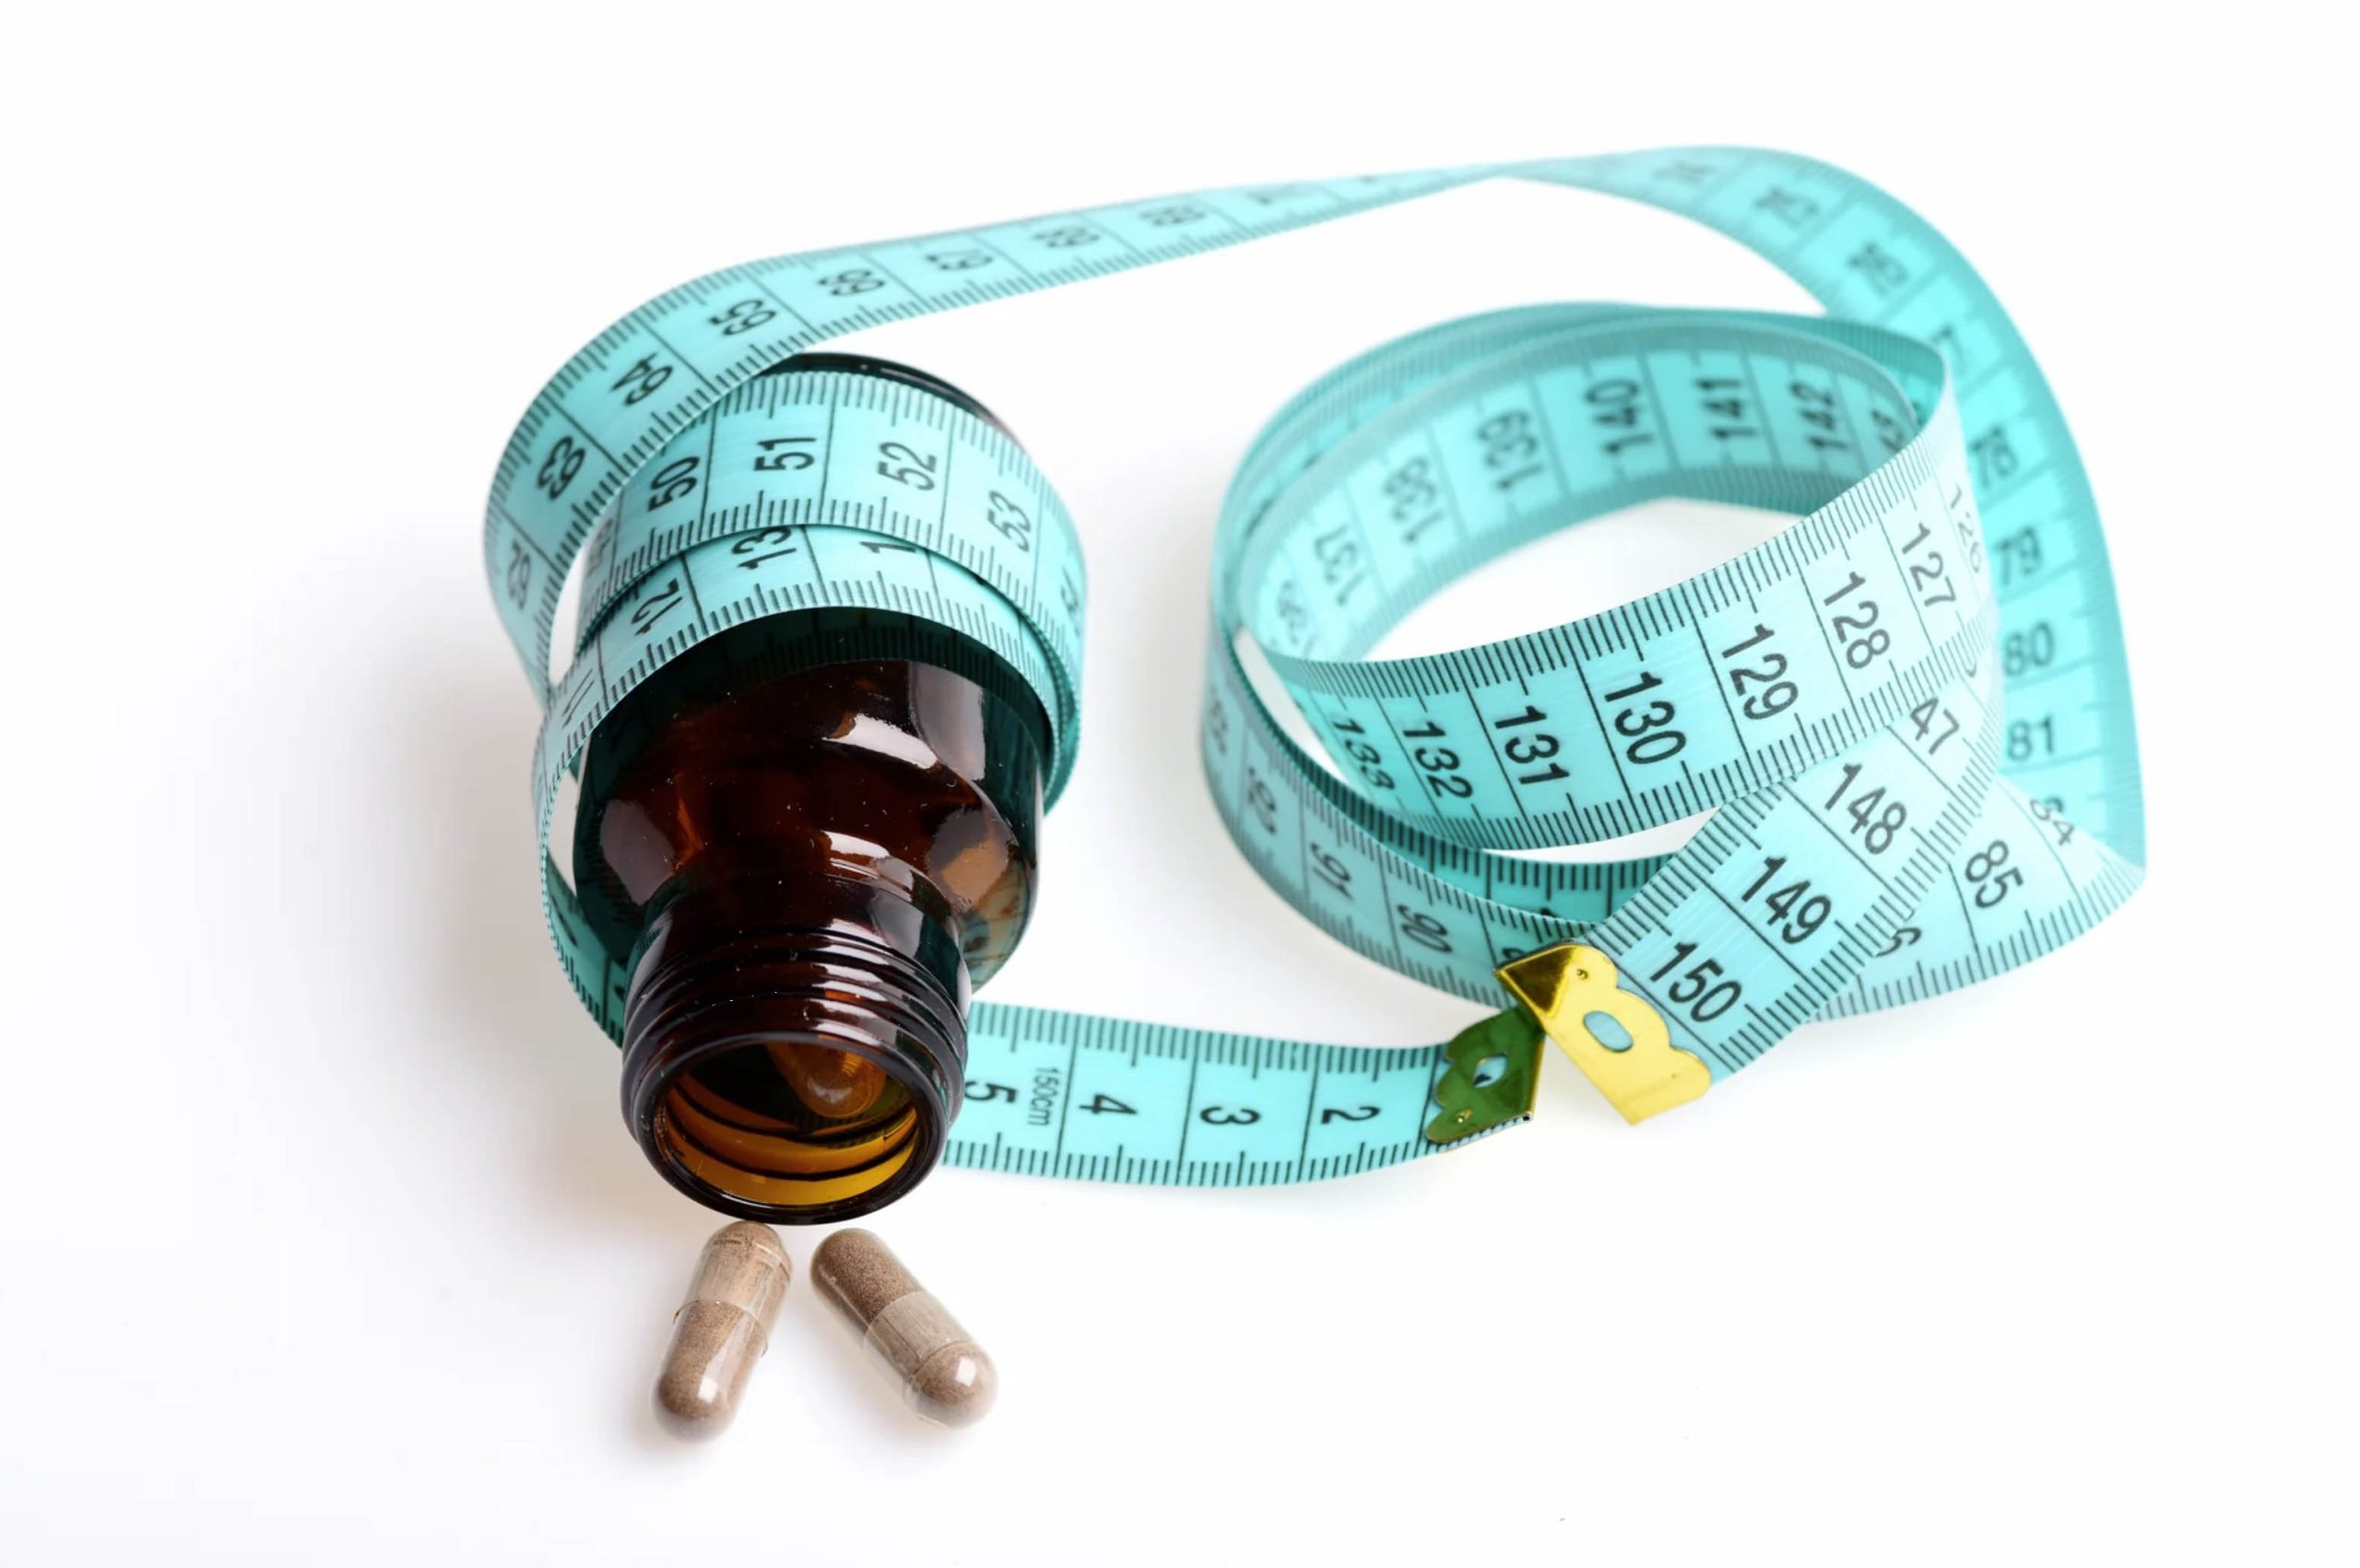 ACGrace - A bottle of pills and a measuring tape on a white background.